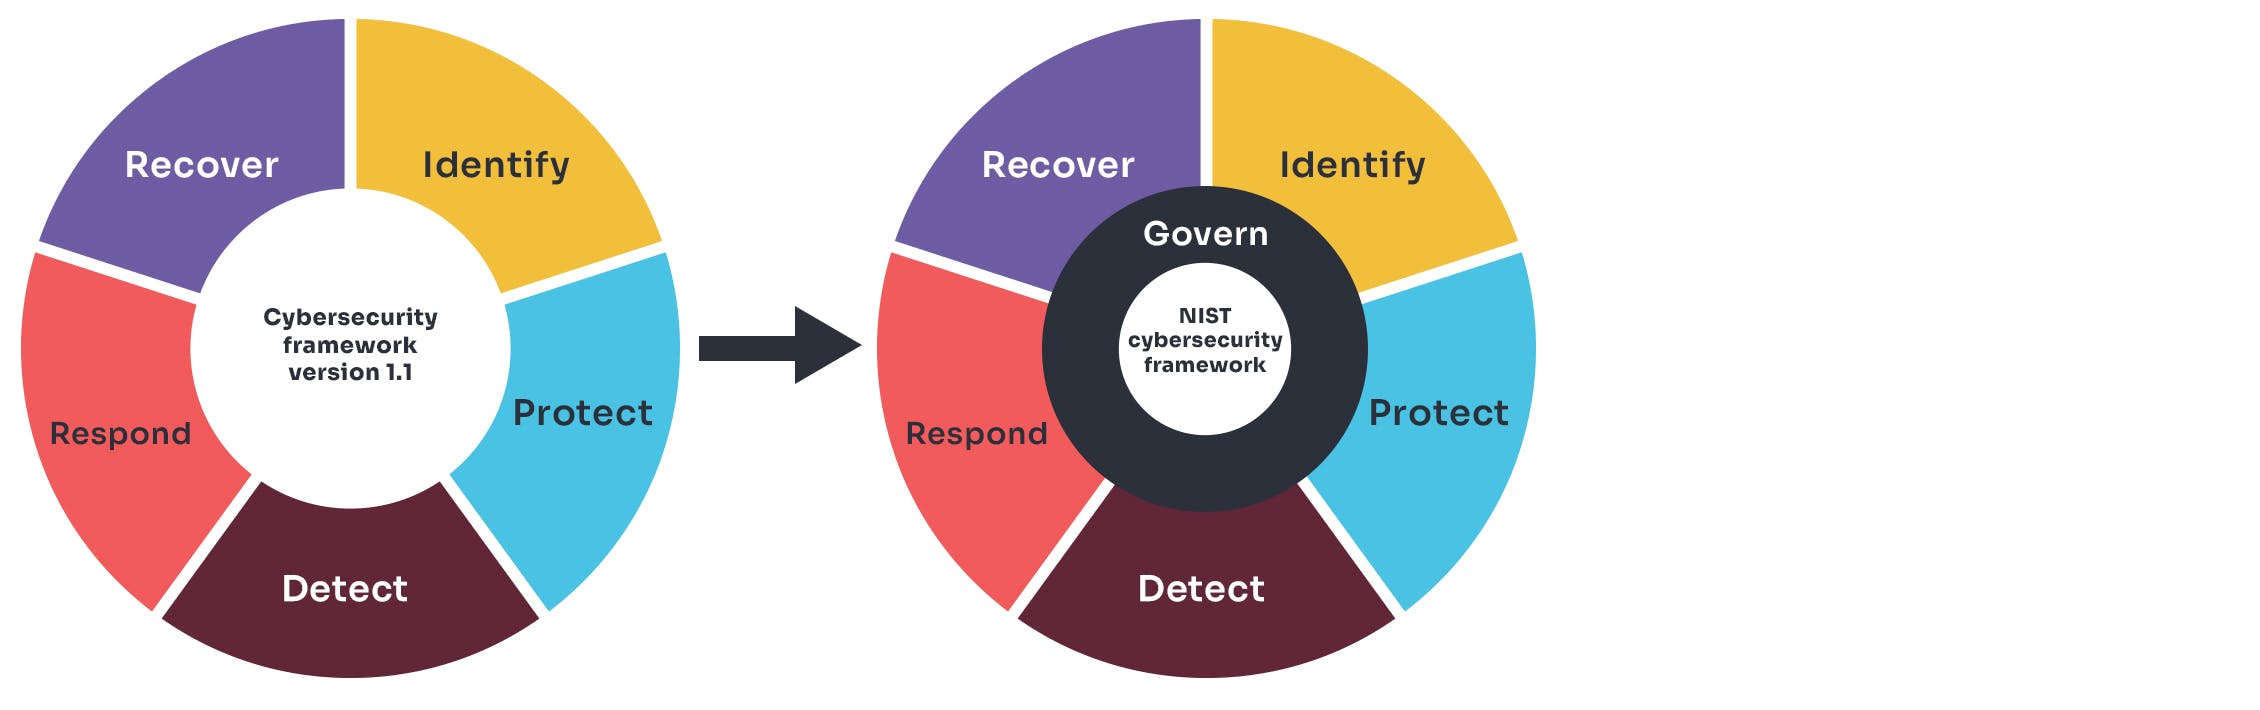 NIST publishes major revision to Cybersecurity Framework (CSF)